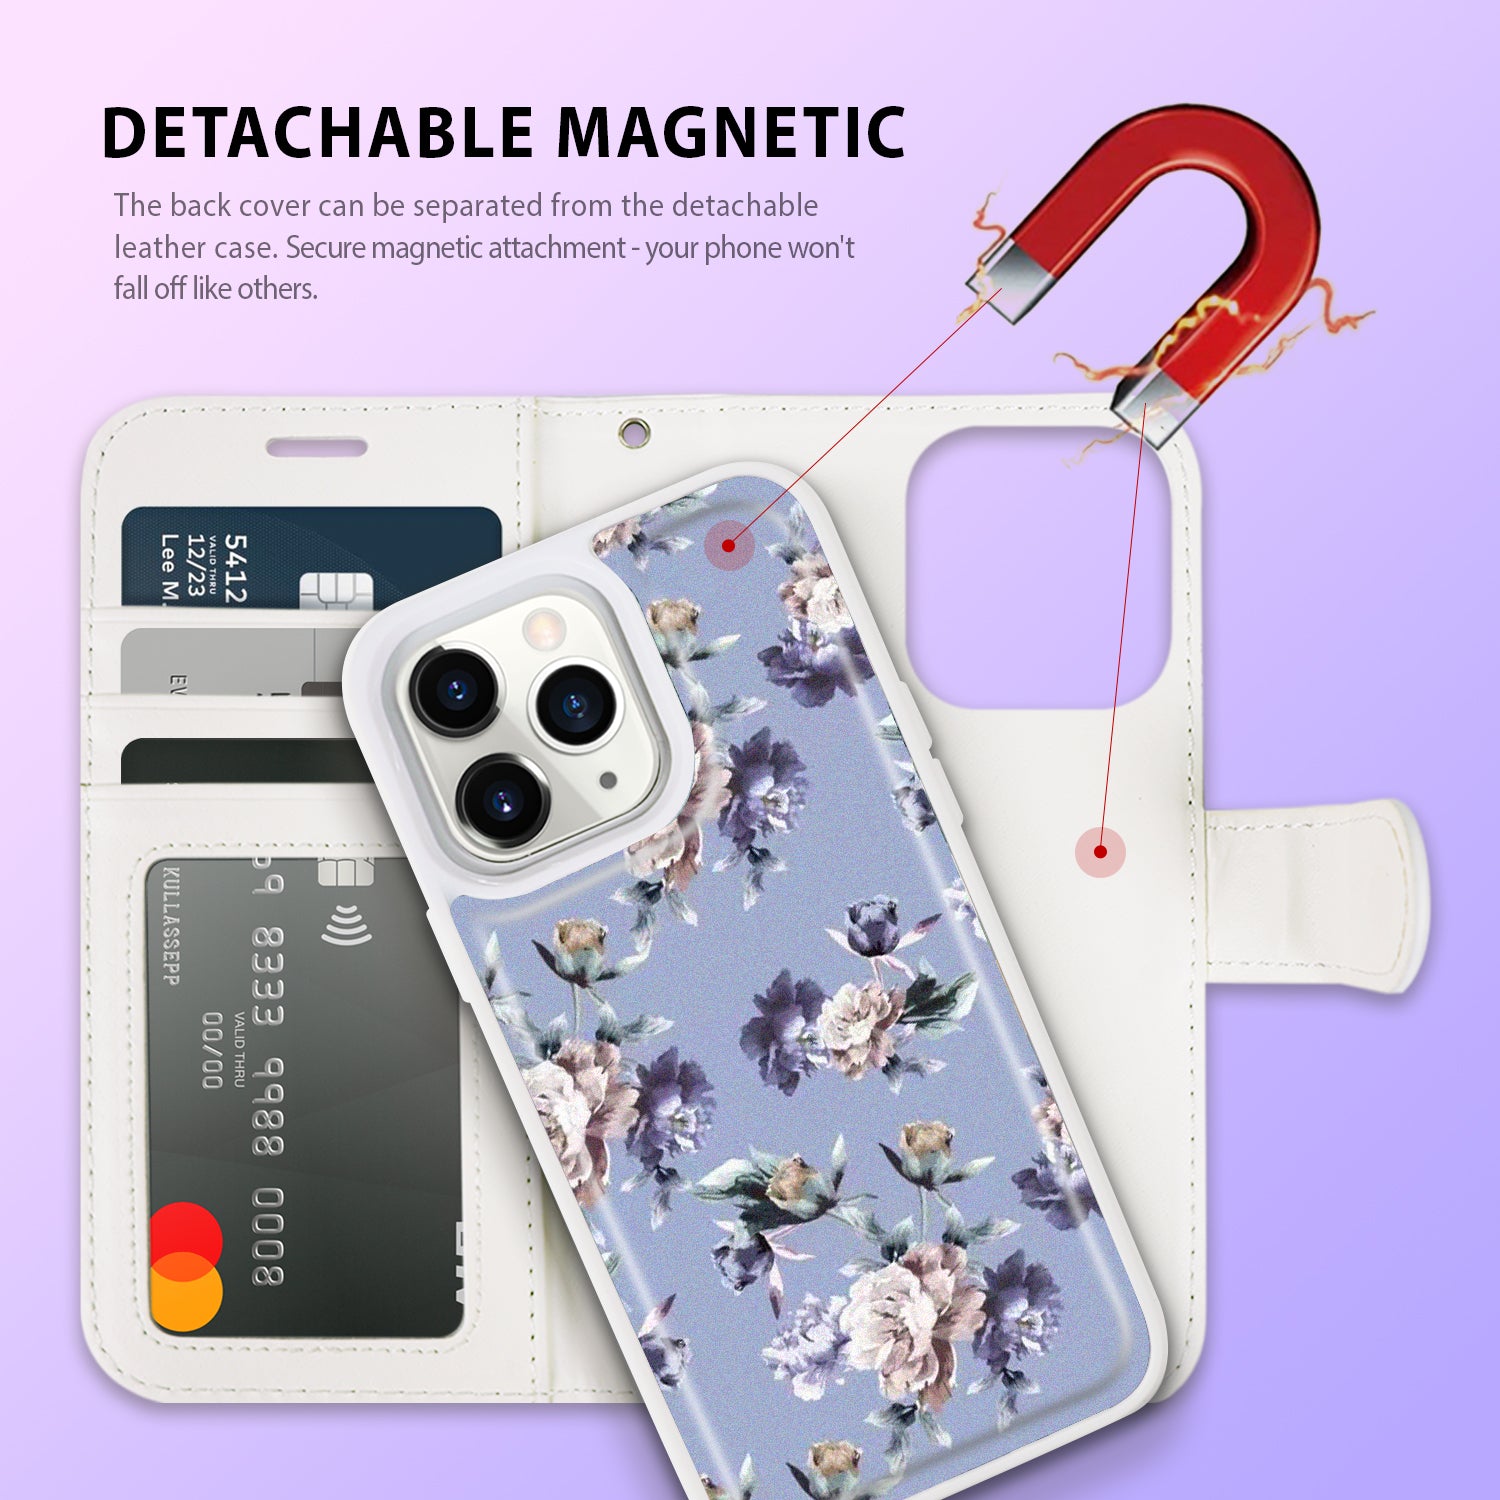 Tough On iPhone 14 Pro Max Magnetic Detachable Leather Case Floral Rosie